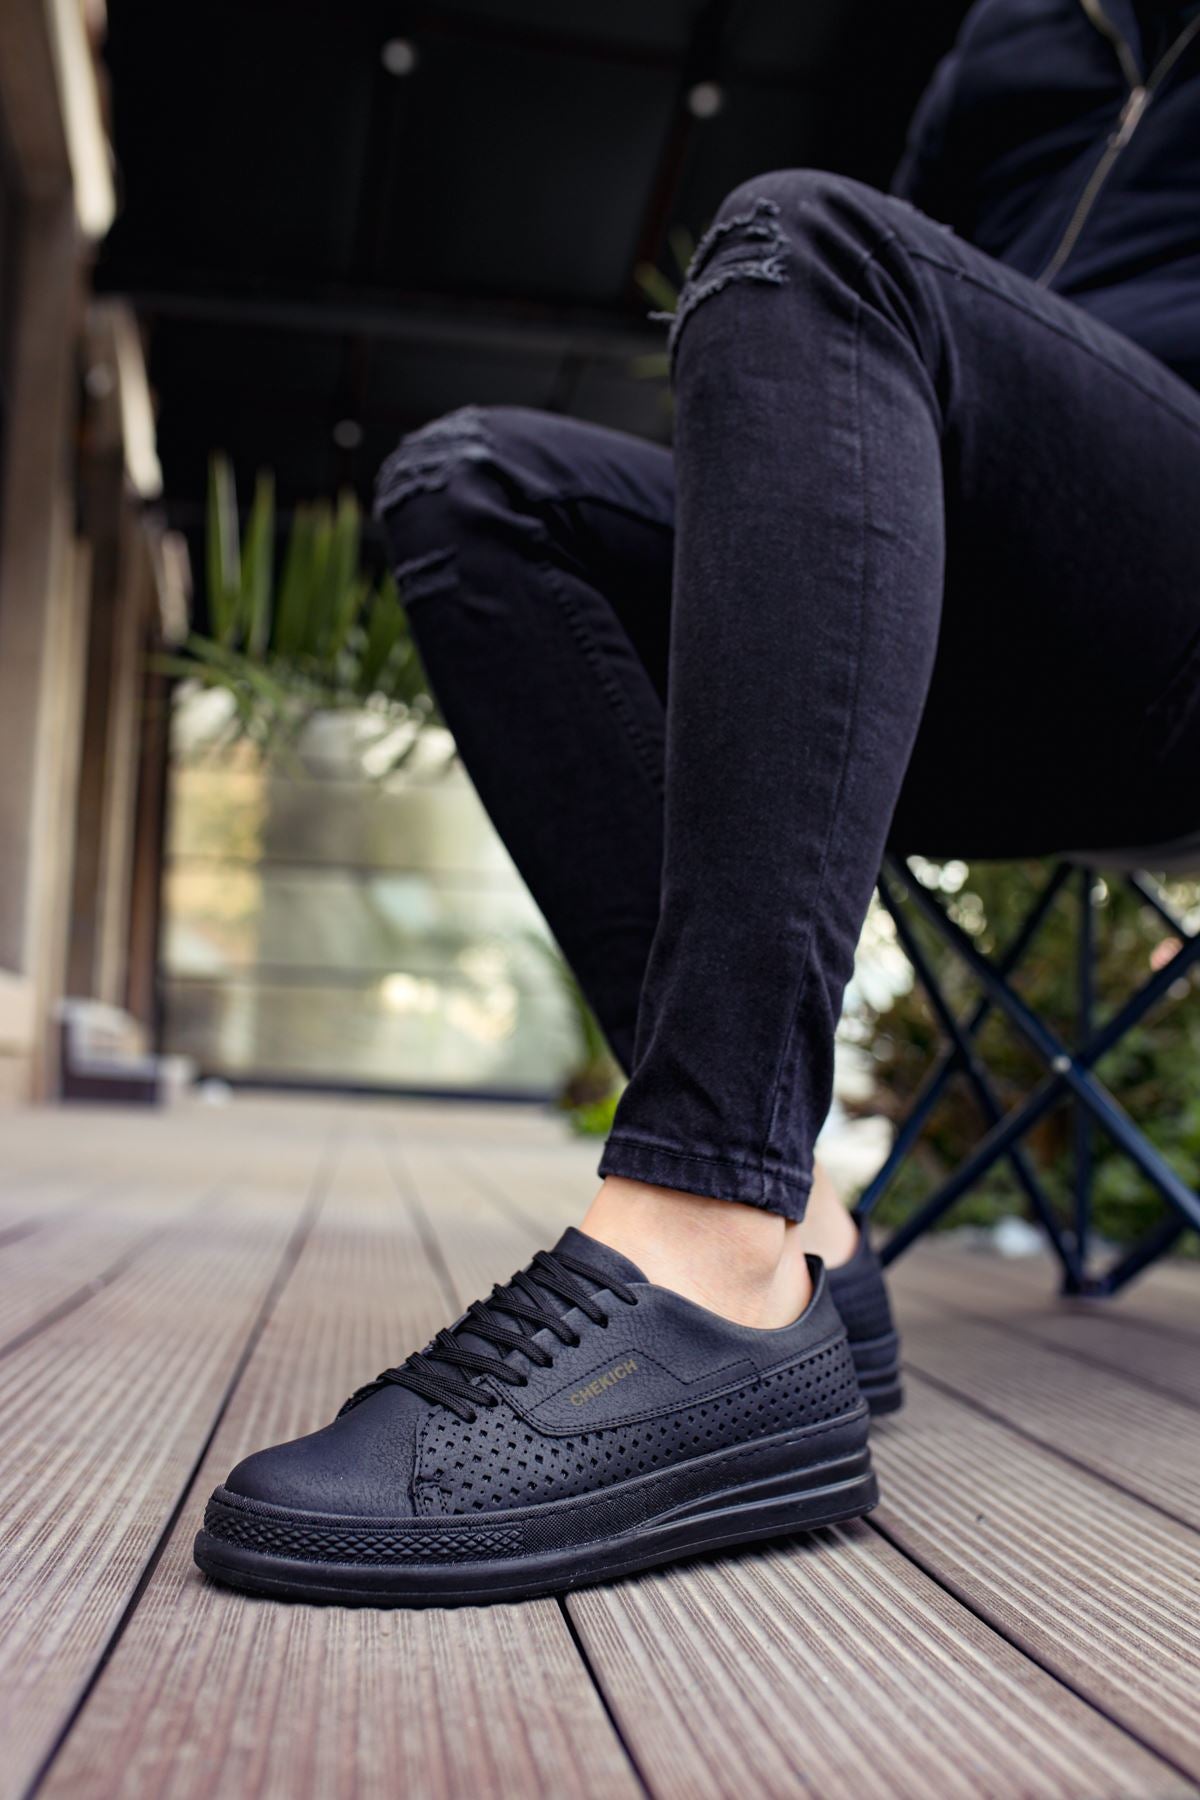 CH043 Men's Unisex Full Black Casual Shoes - STREETMODE ™